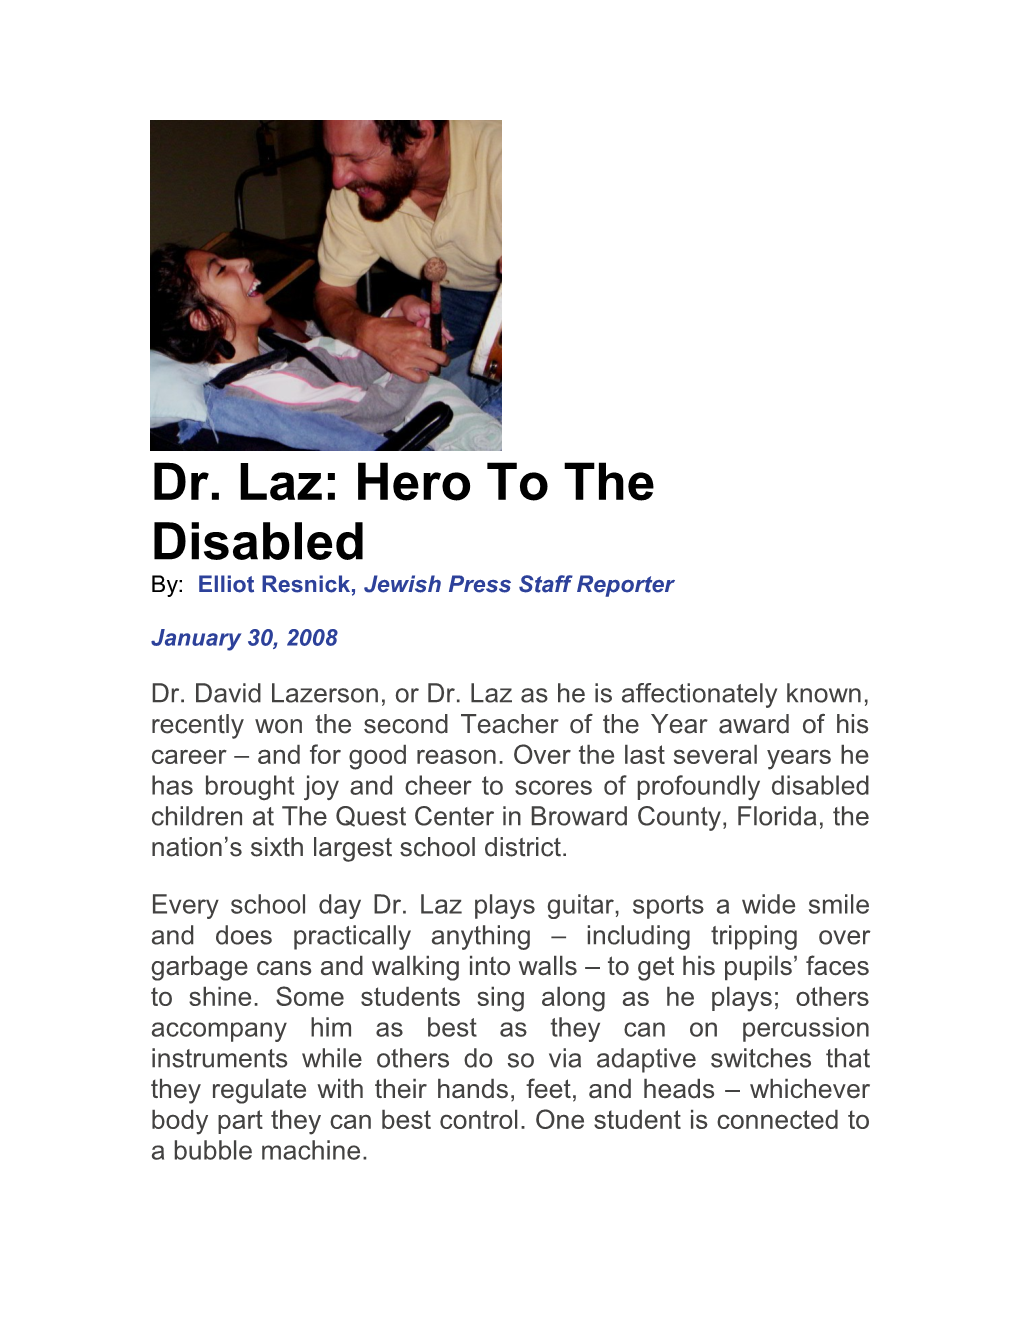 Dr. Laz: Hero to the Disabled